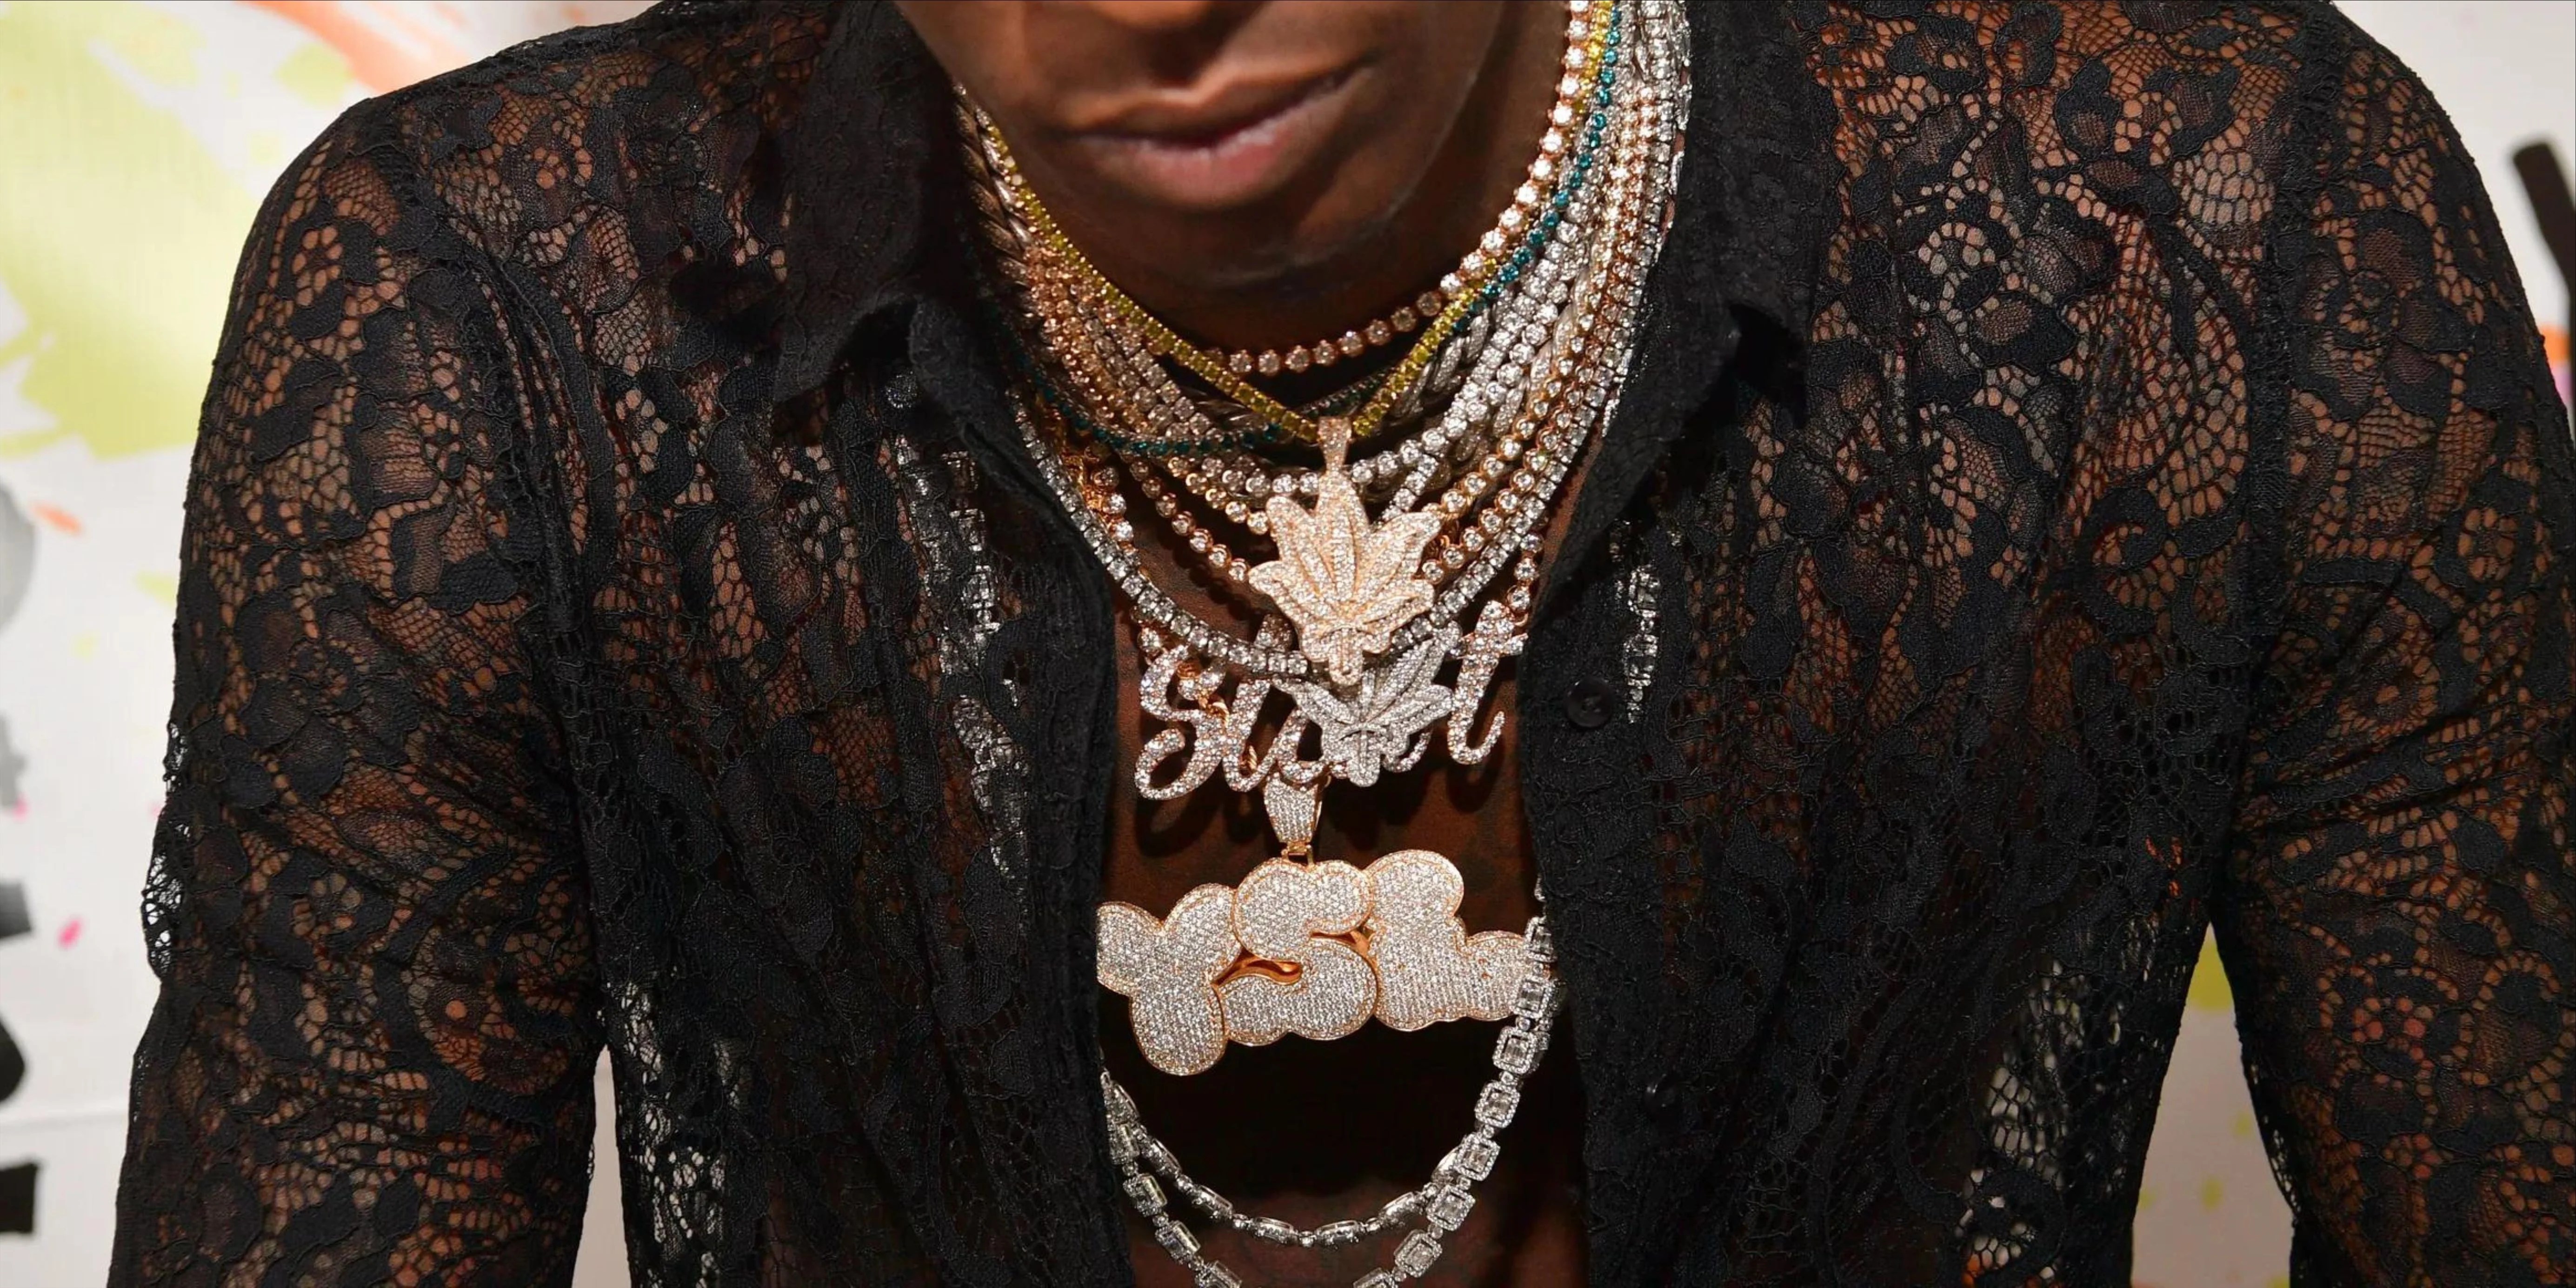 Where Do Rappers Buy Jewelry